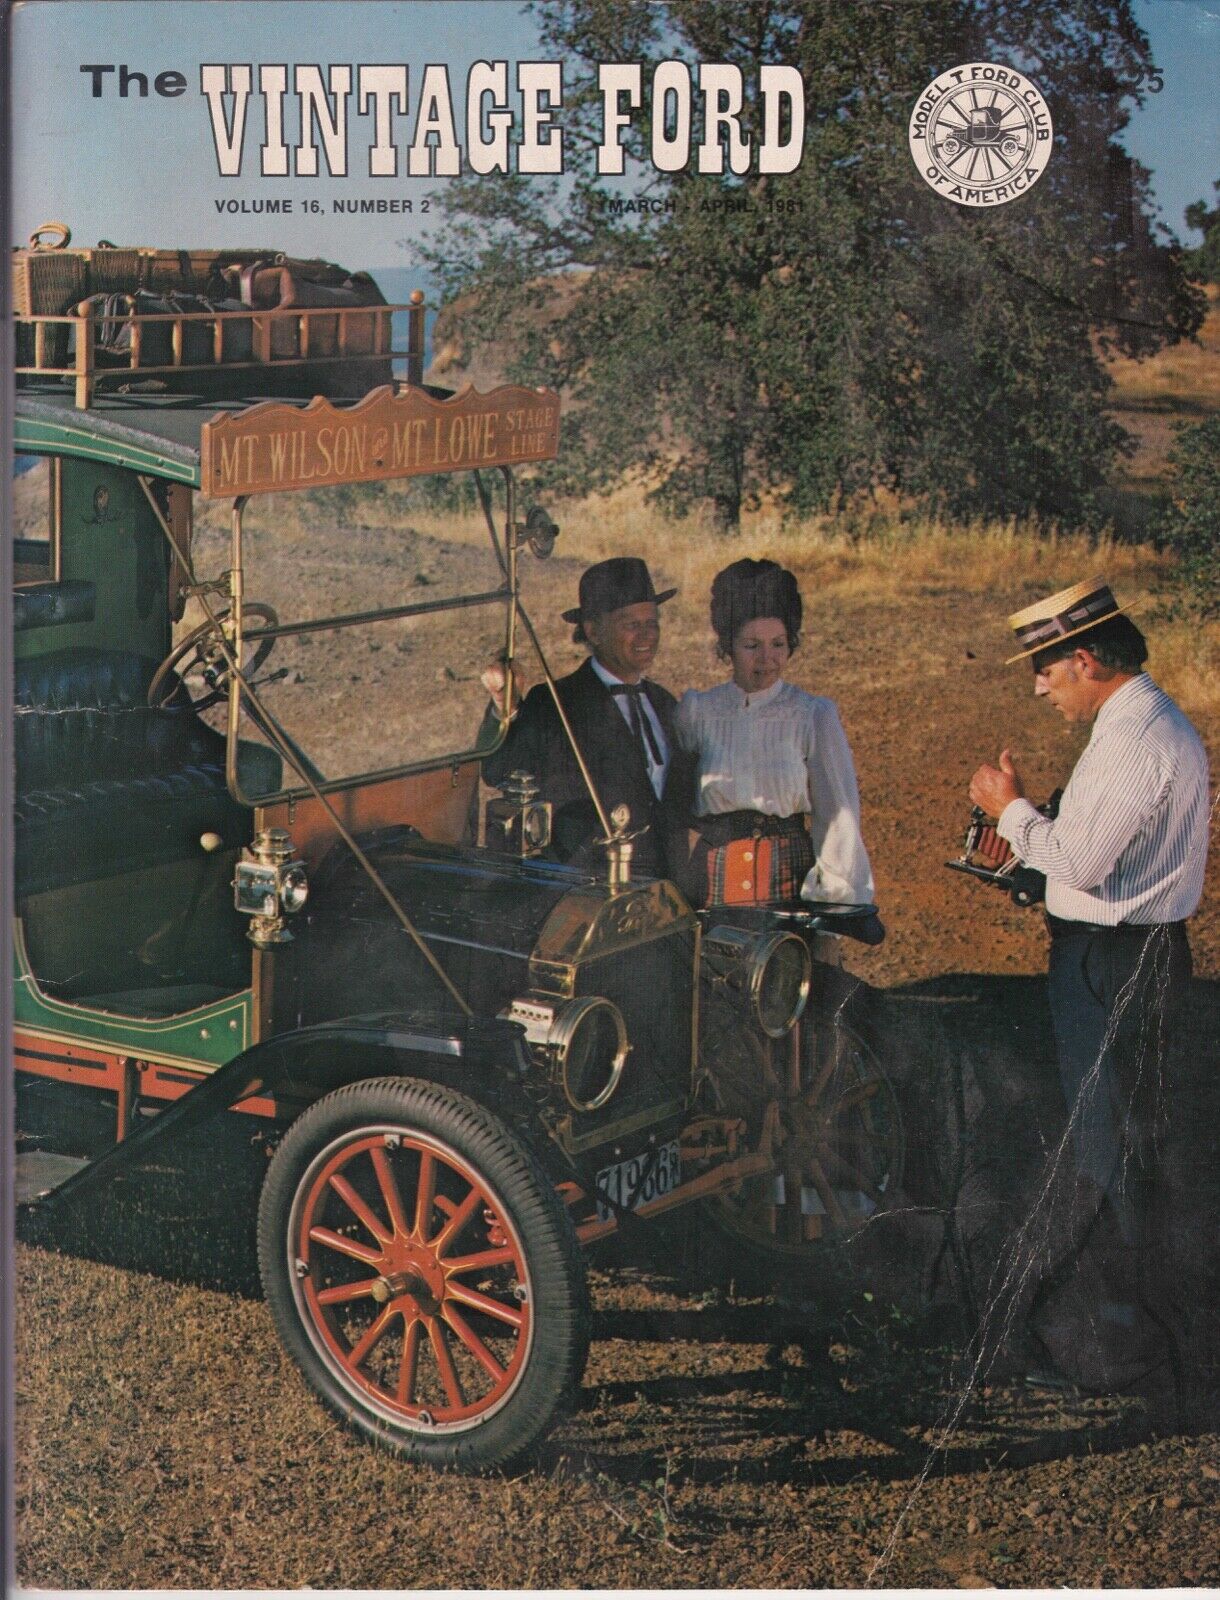 1911 MODEL T FORD BUS - VINTAGE FORD MAGAZINE 1981 - THE MODEL CLUB AMERICA